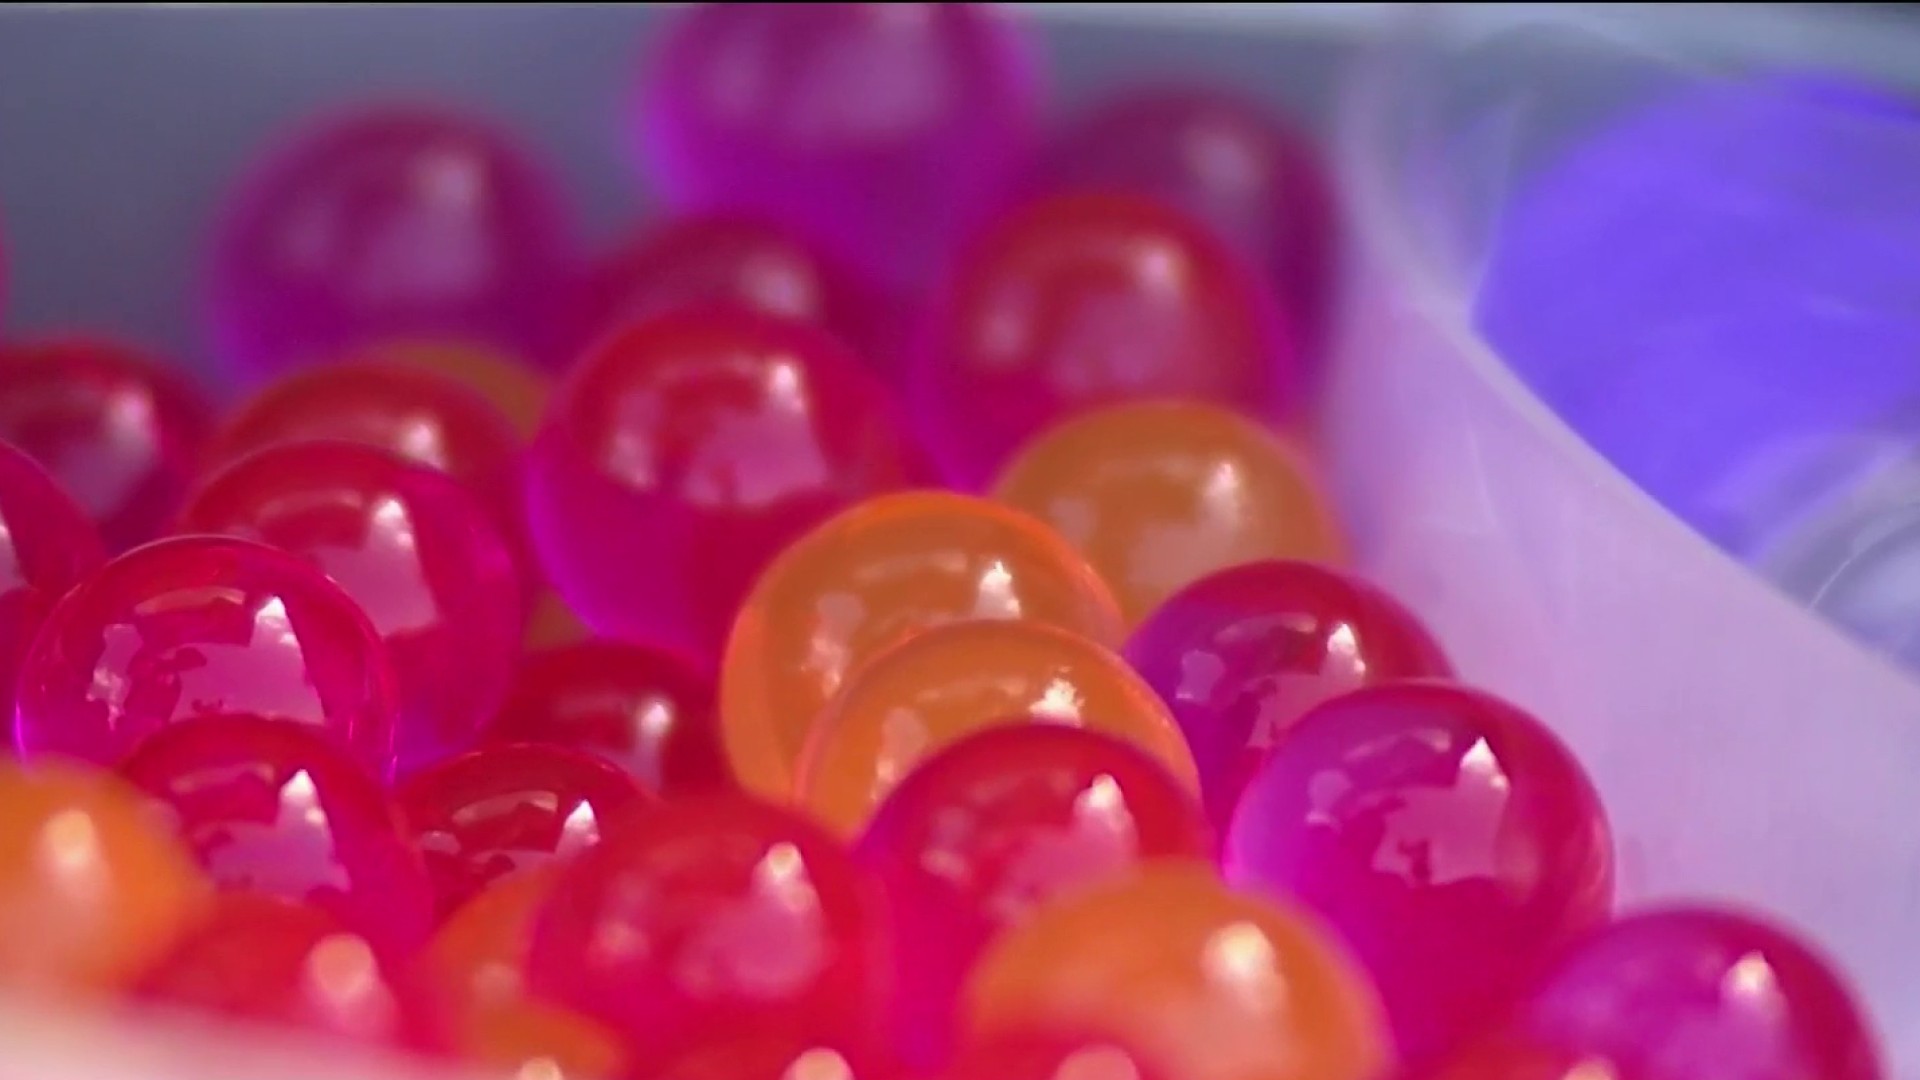 The 'Orbeez Challenge' is causing harm in parts of Georgia and